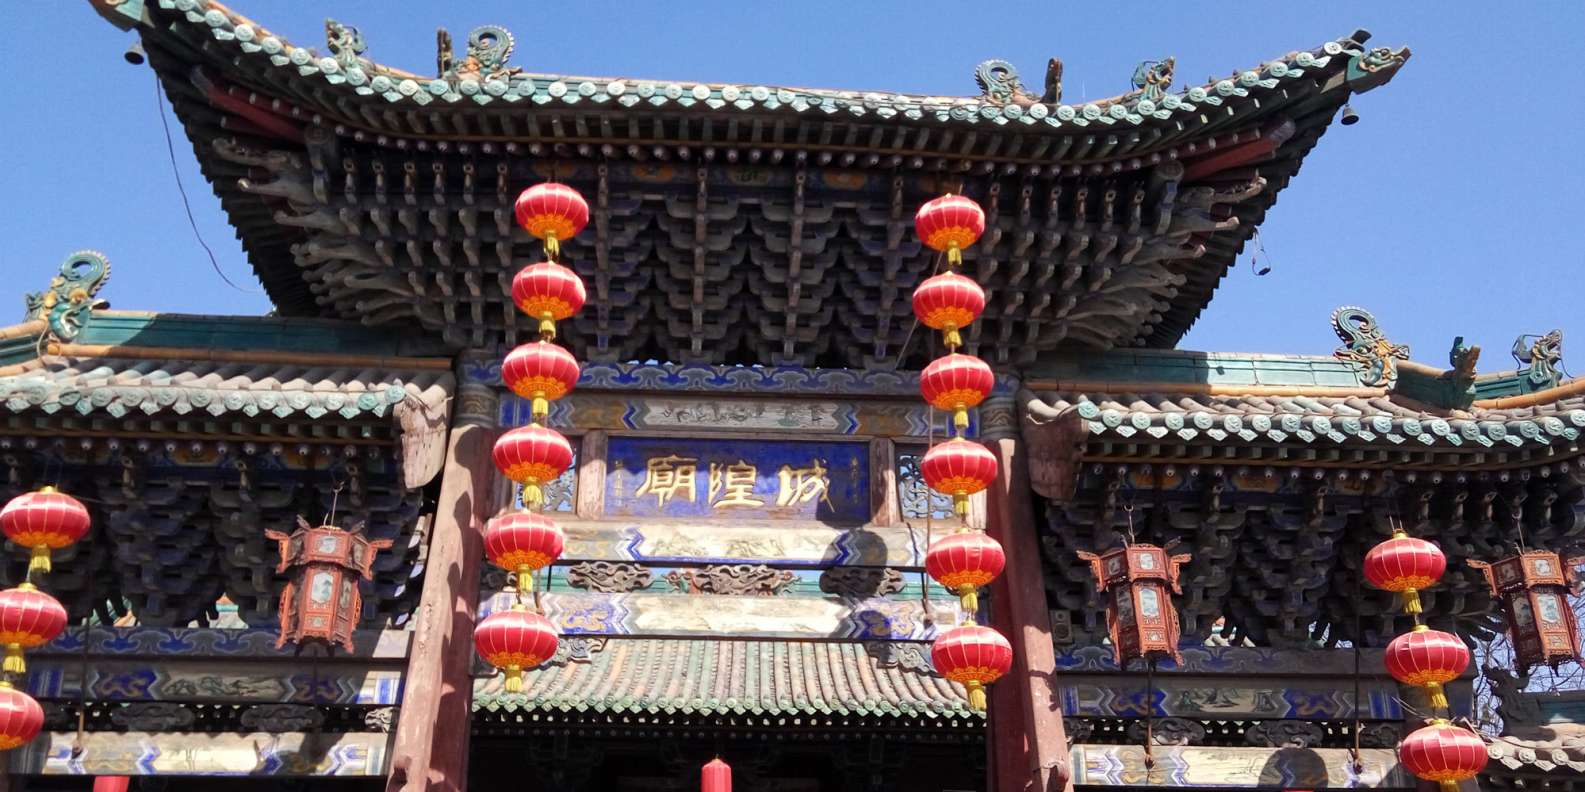 What to do in Pingyao